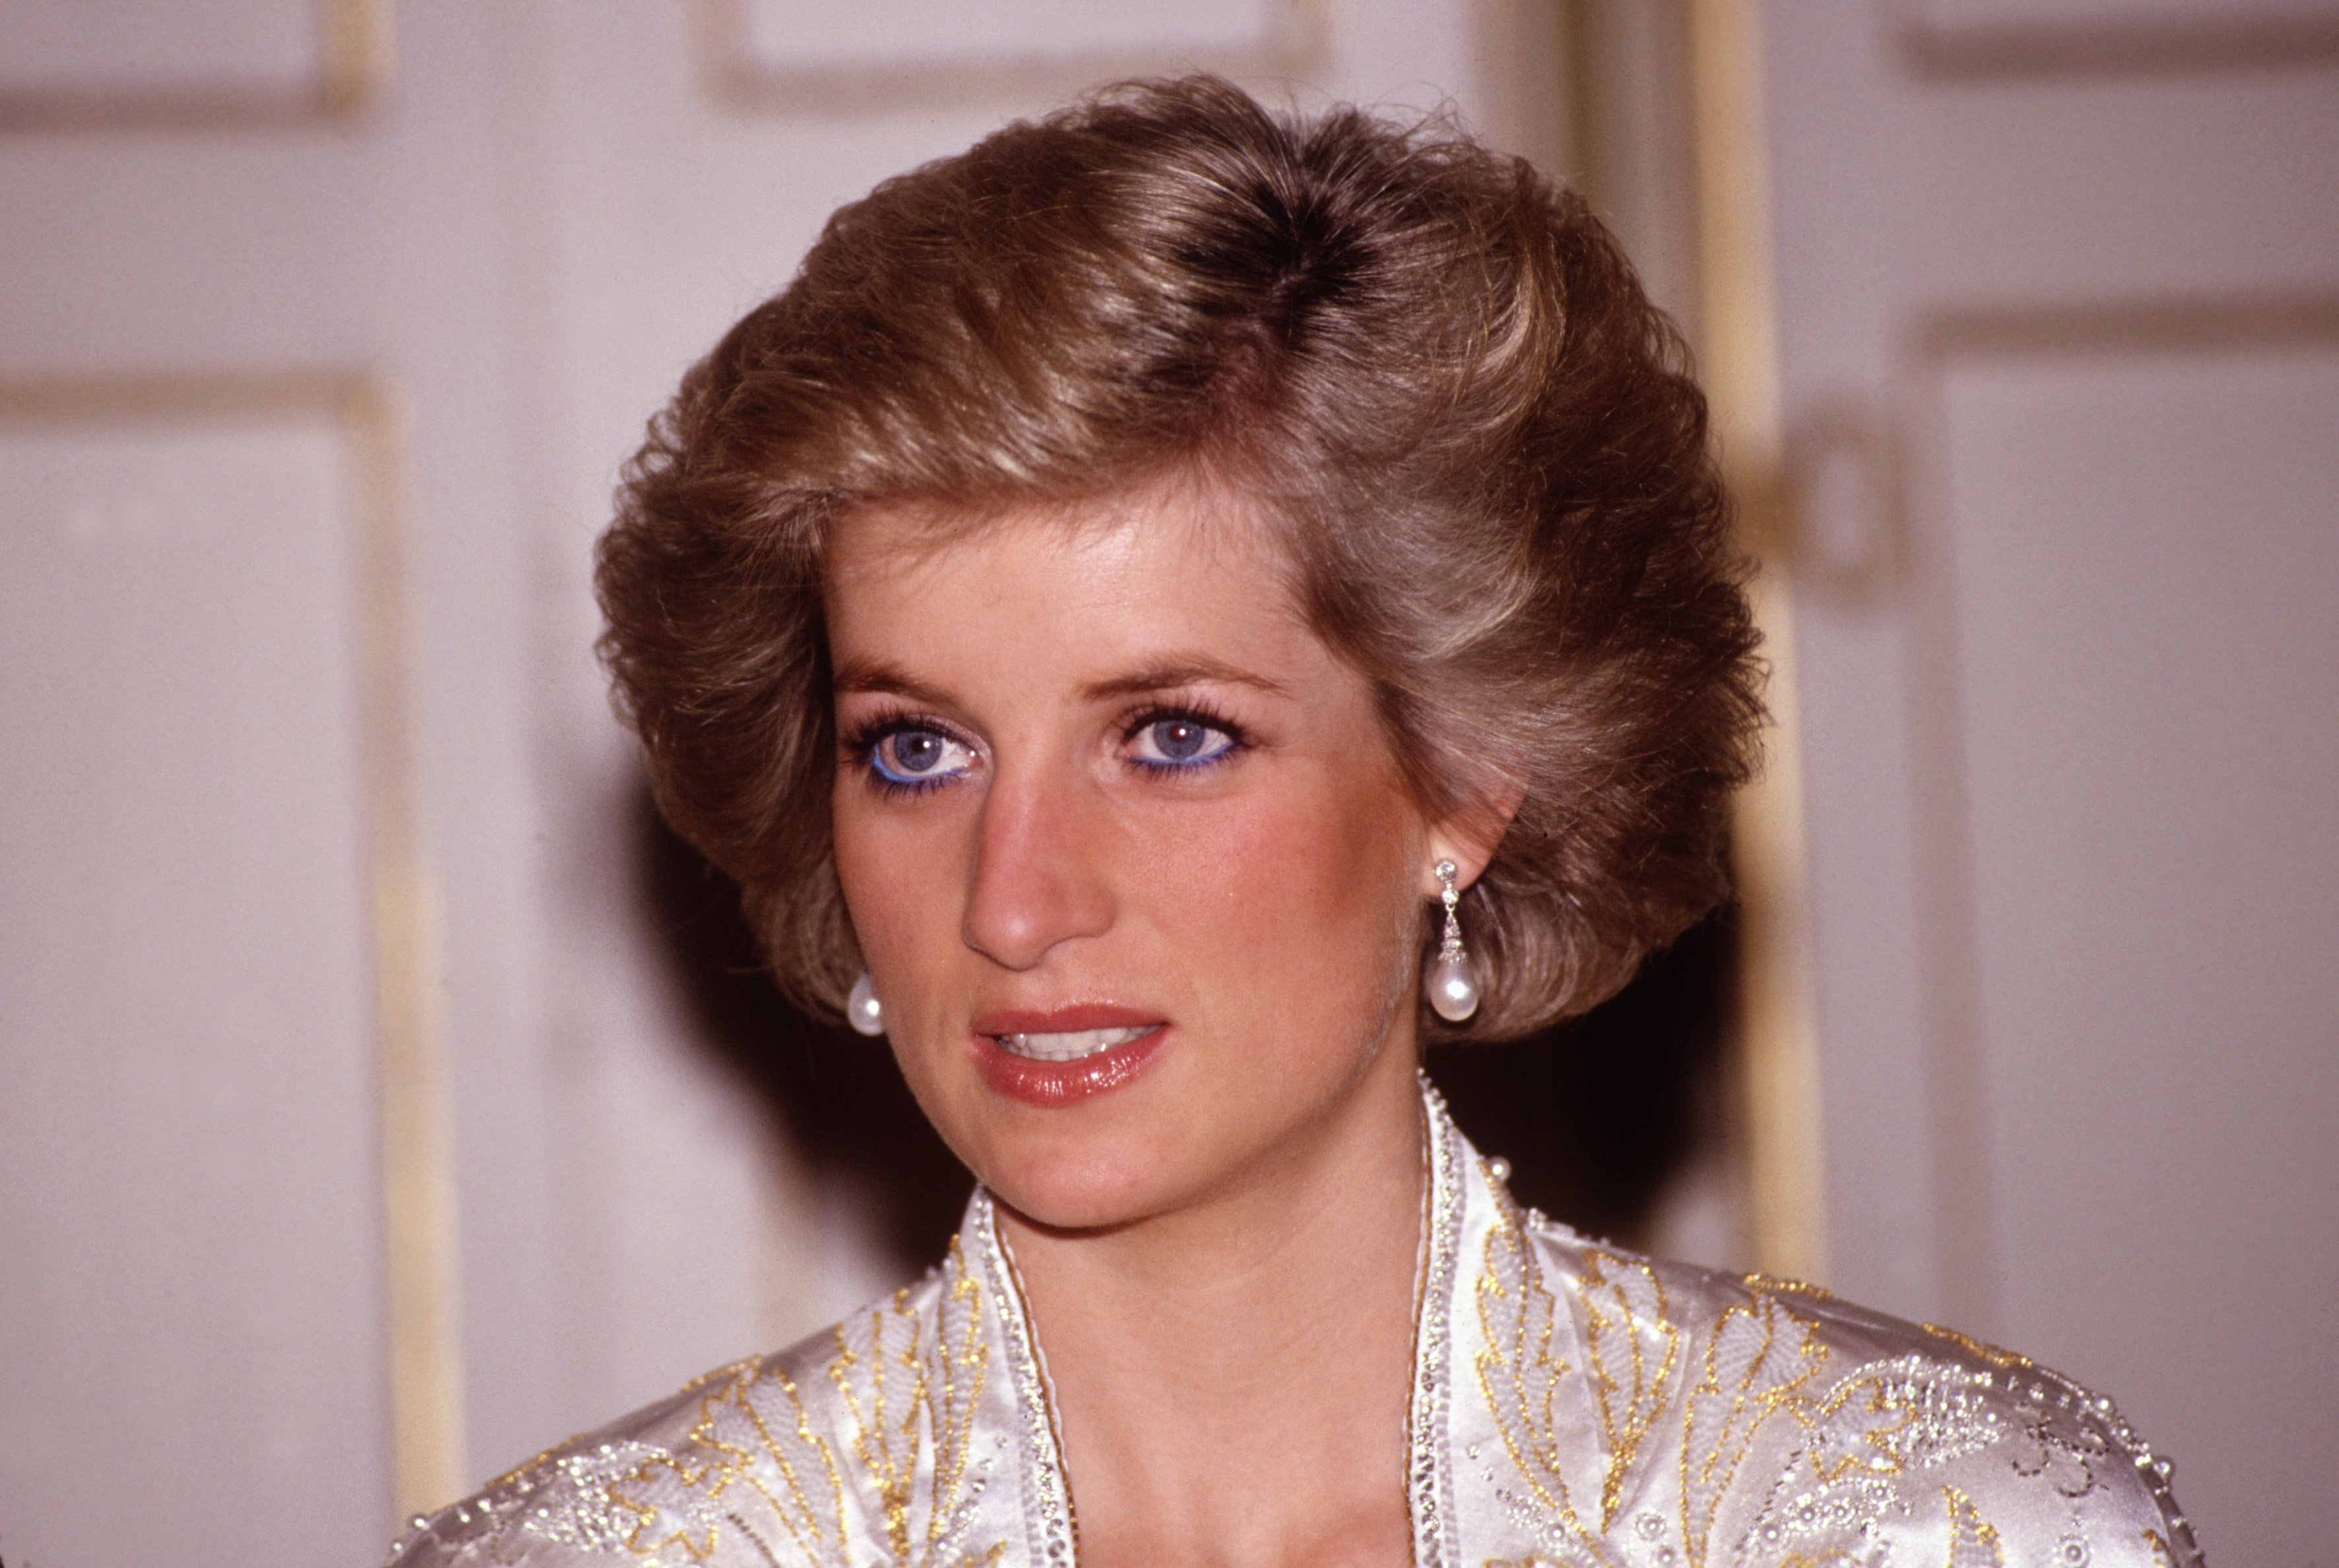 Diana Princess of Wales at a dinner given by President Mitterand in November, 1988 at the Elysee Palace in Paris, France during the Royal Tour of France.Diana wore a dress designed by Victor Edelstein. | Photo: Getty Images